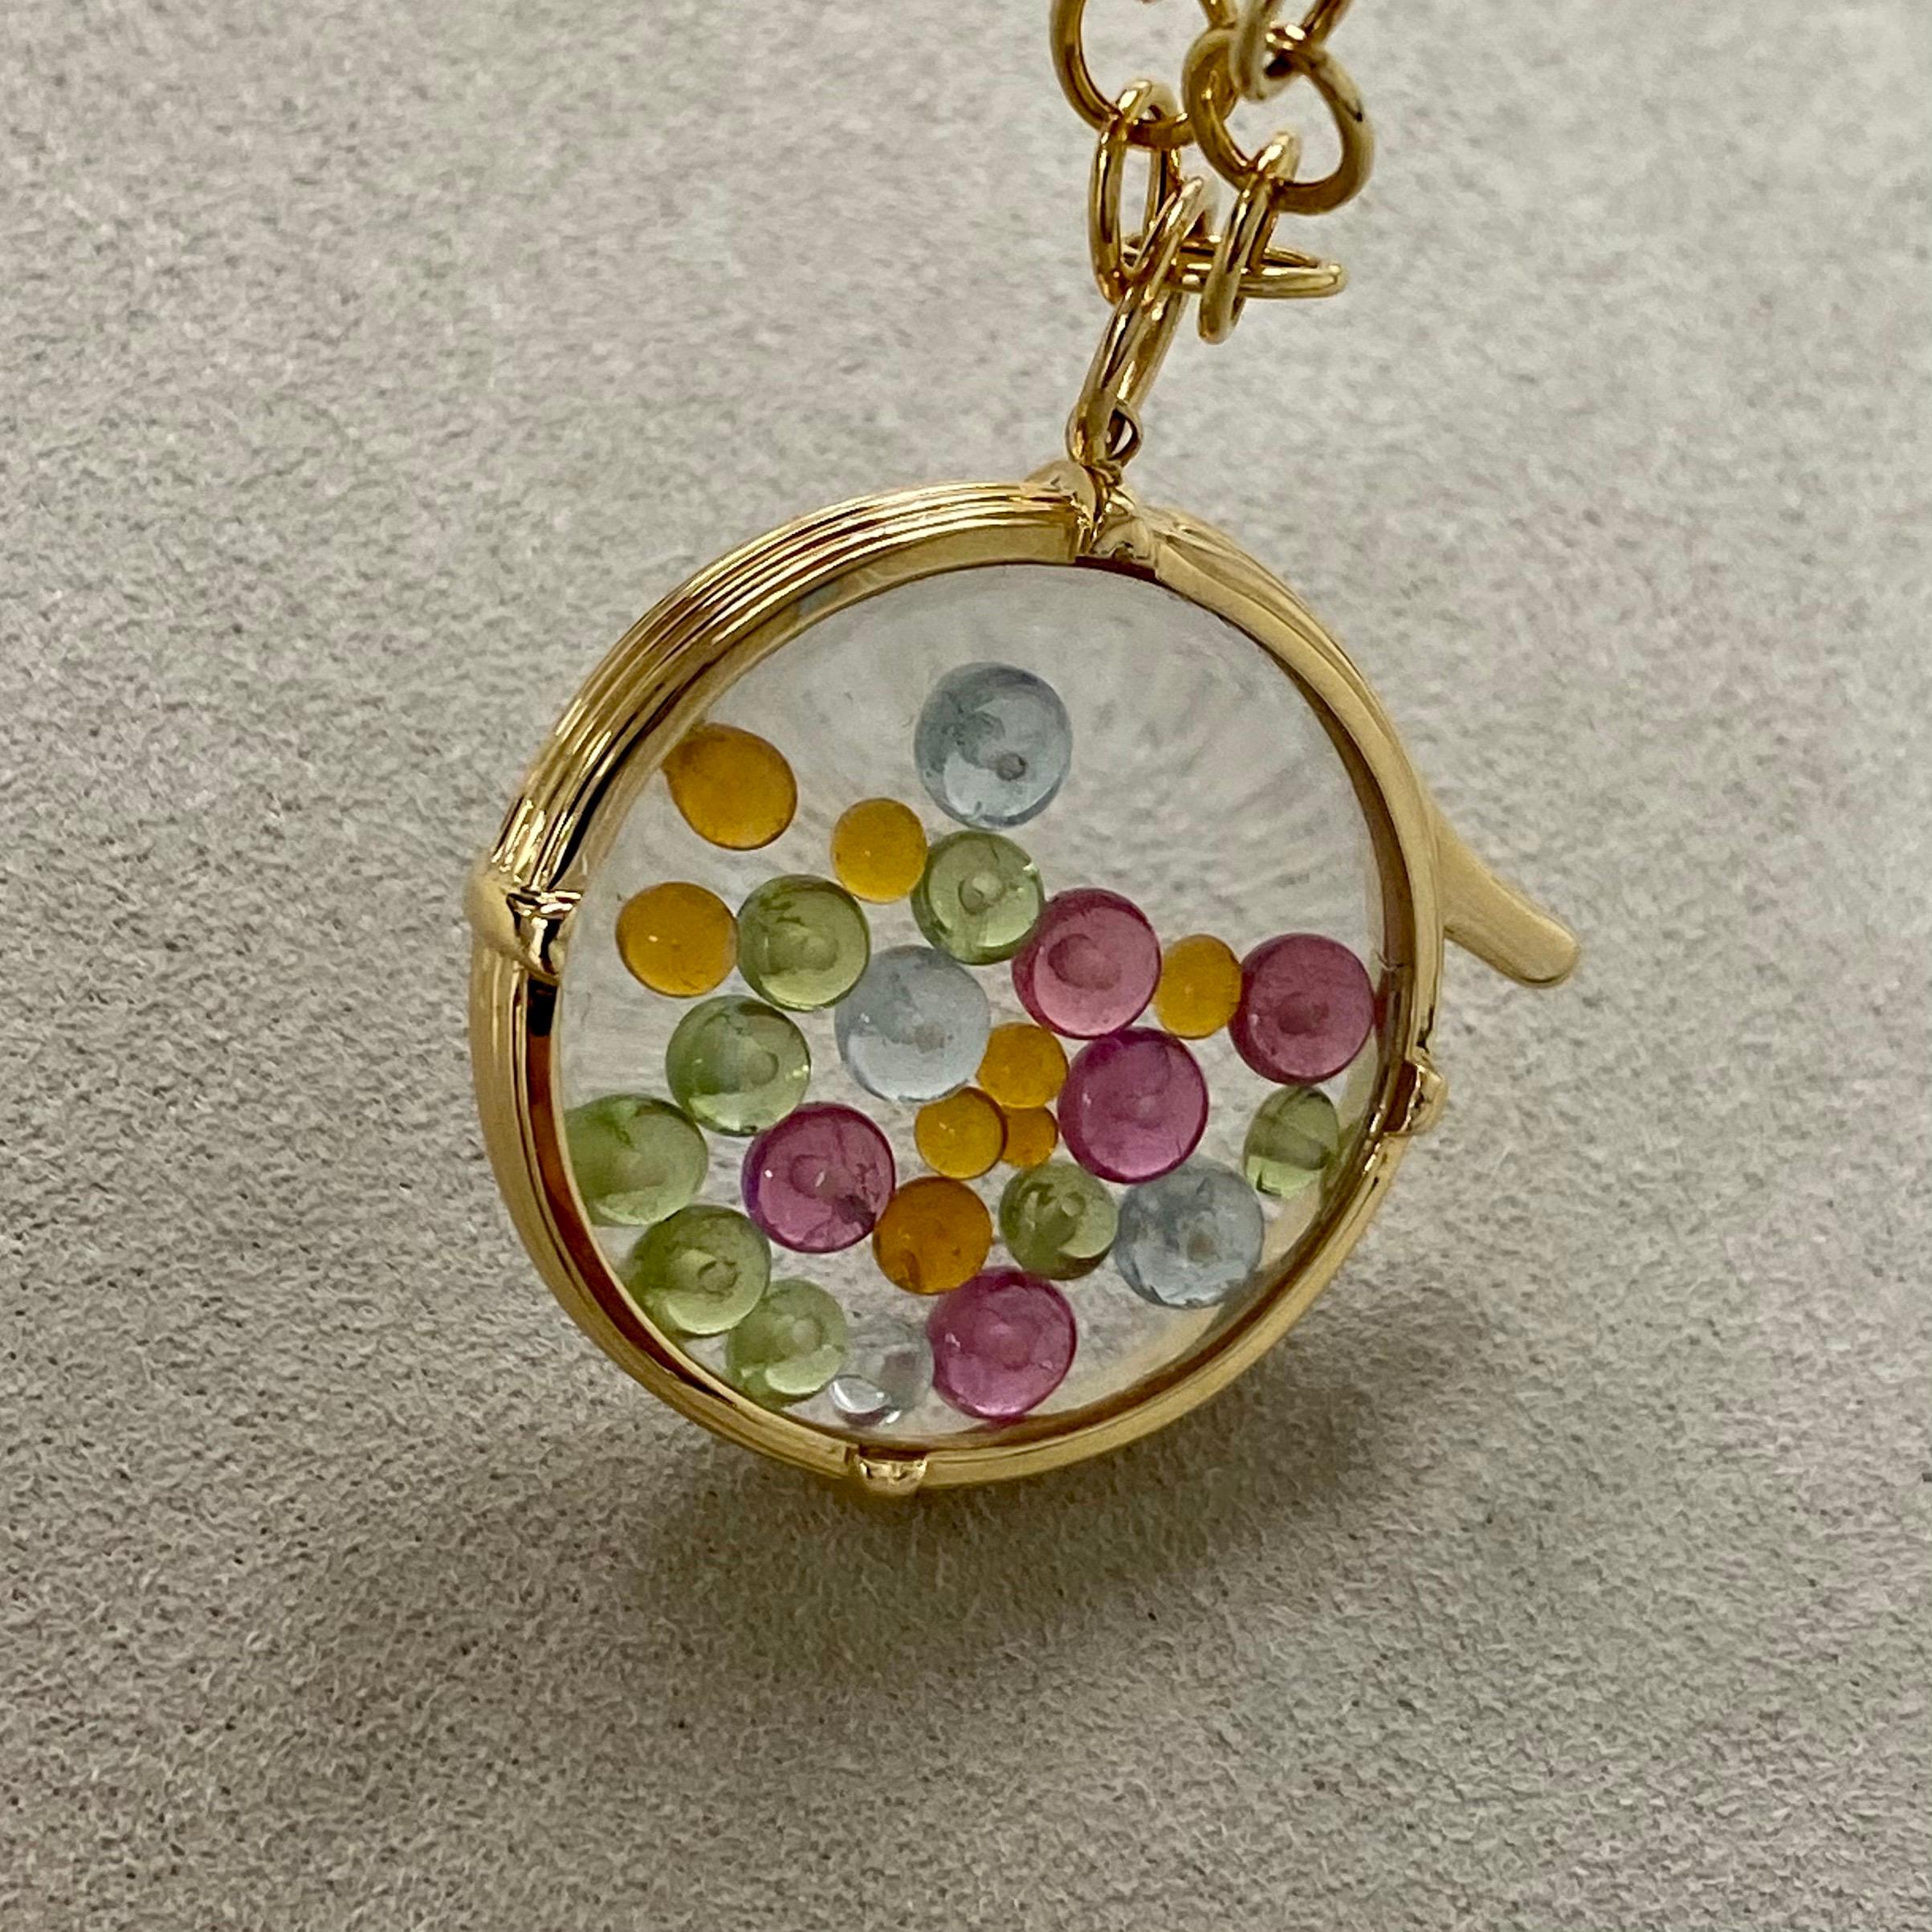 Contemporary Syna Yellow Gold Crystal Locket with Multi-Color Gemstone Beads